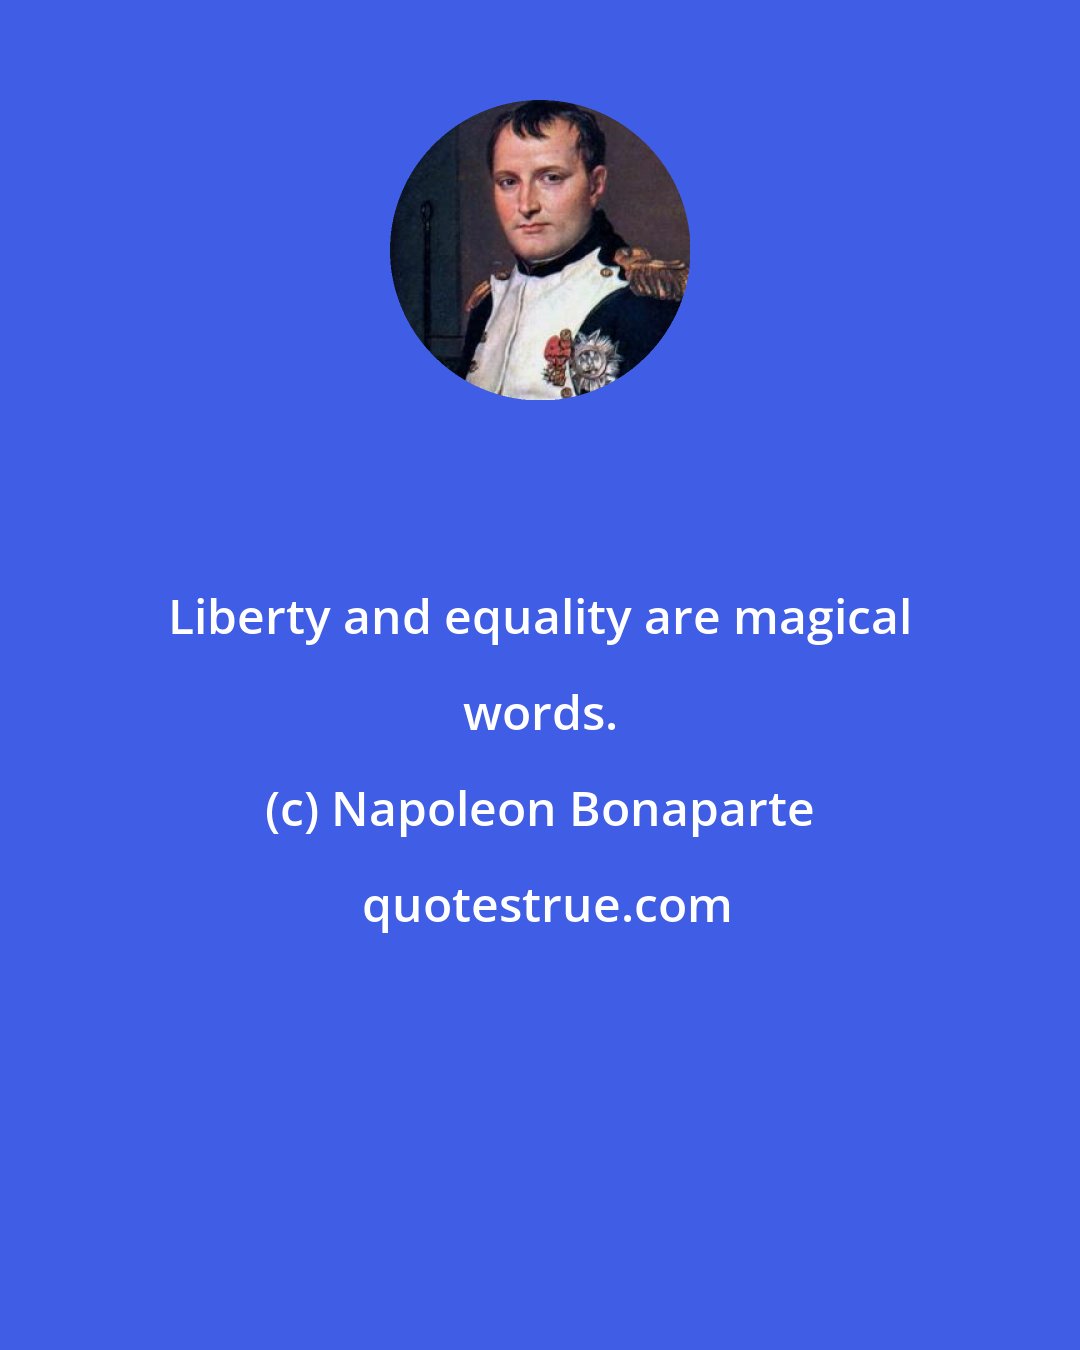 Napoleon Bonaparte: Liberty and equality are magical words.